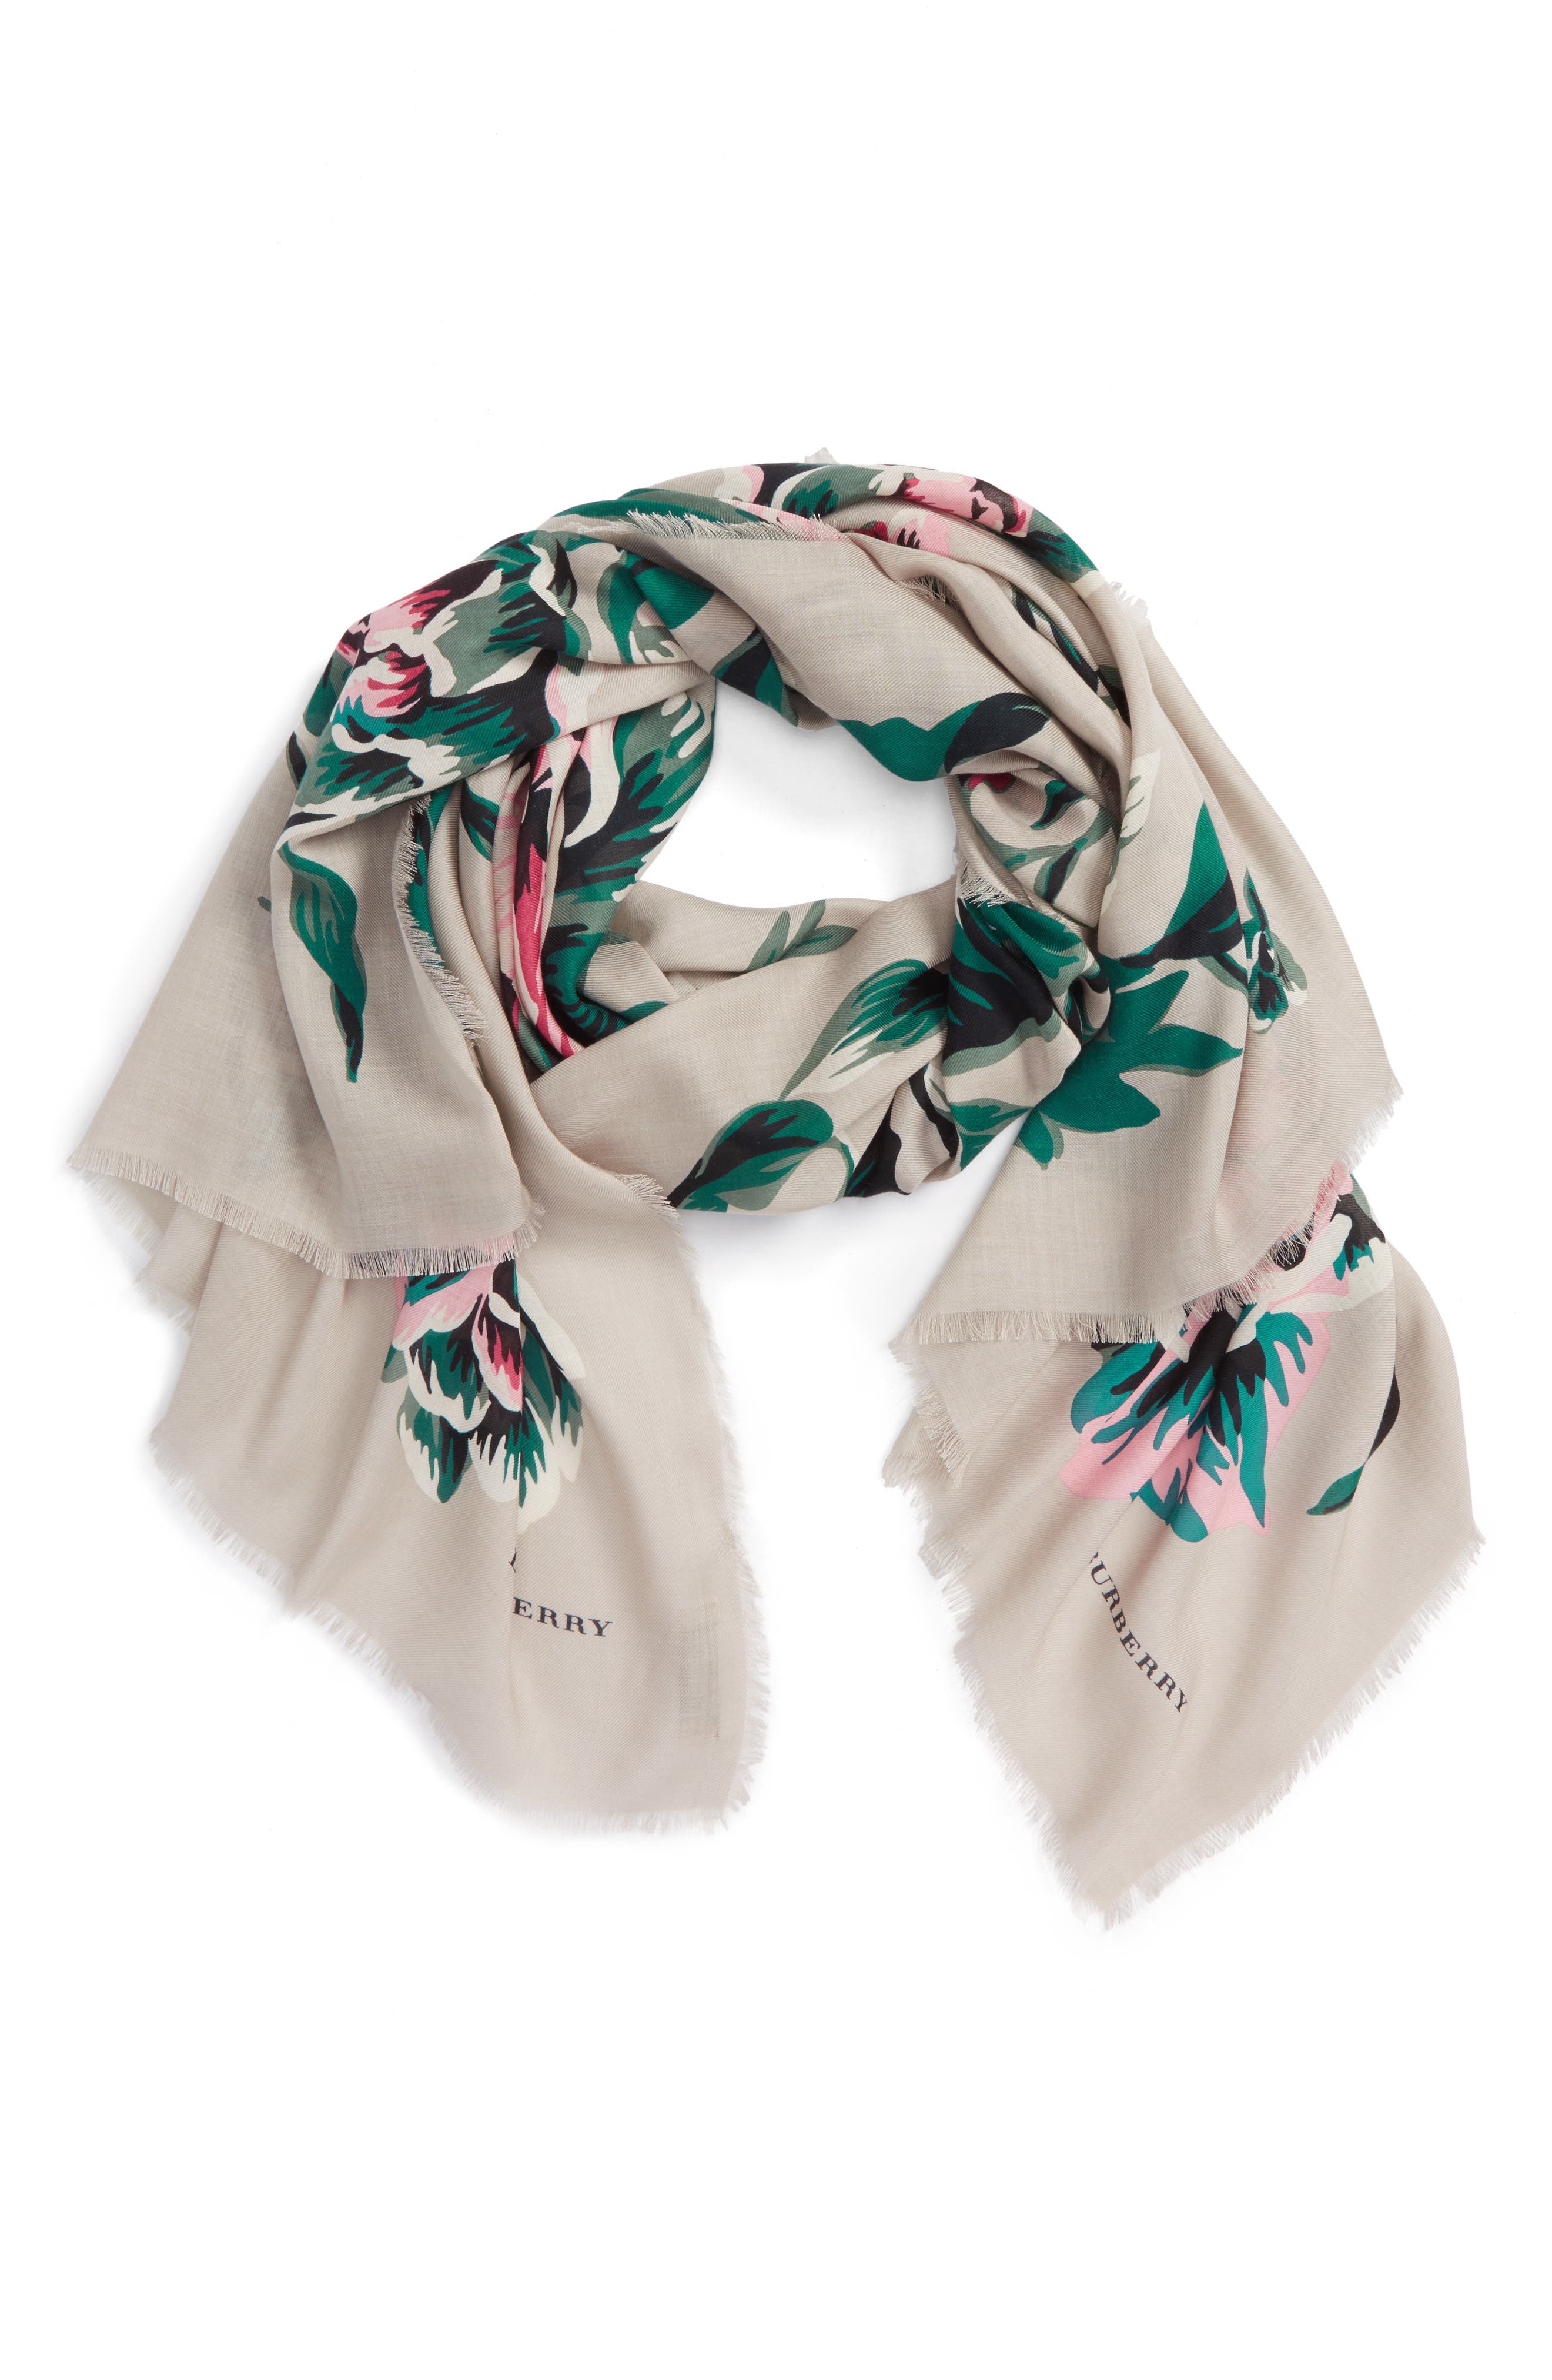 burberry floral scarf